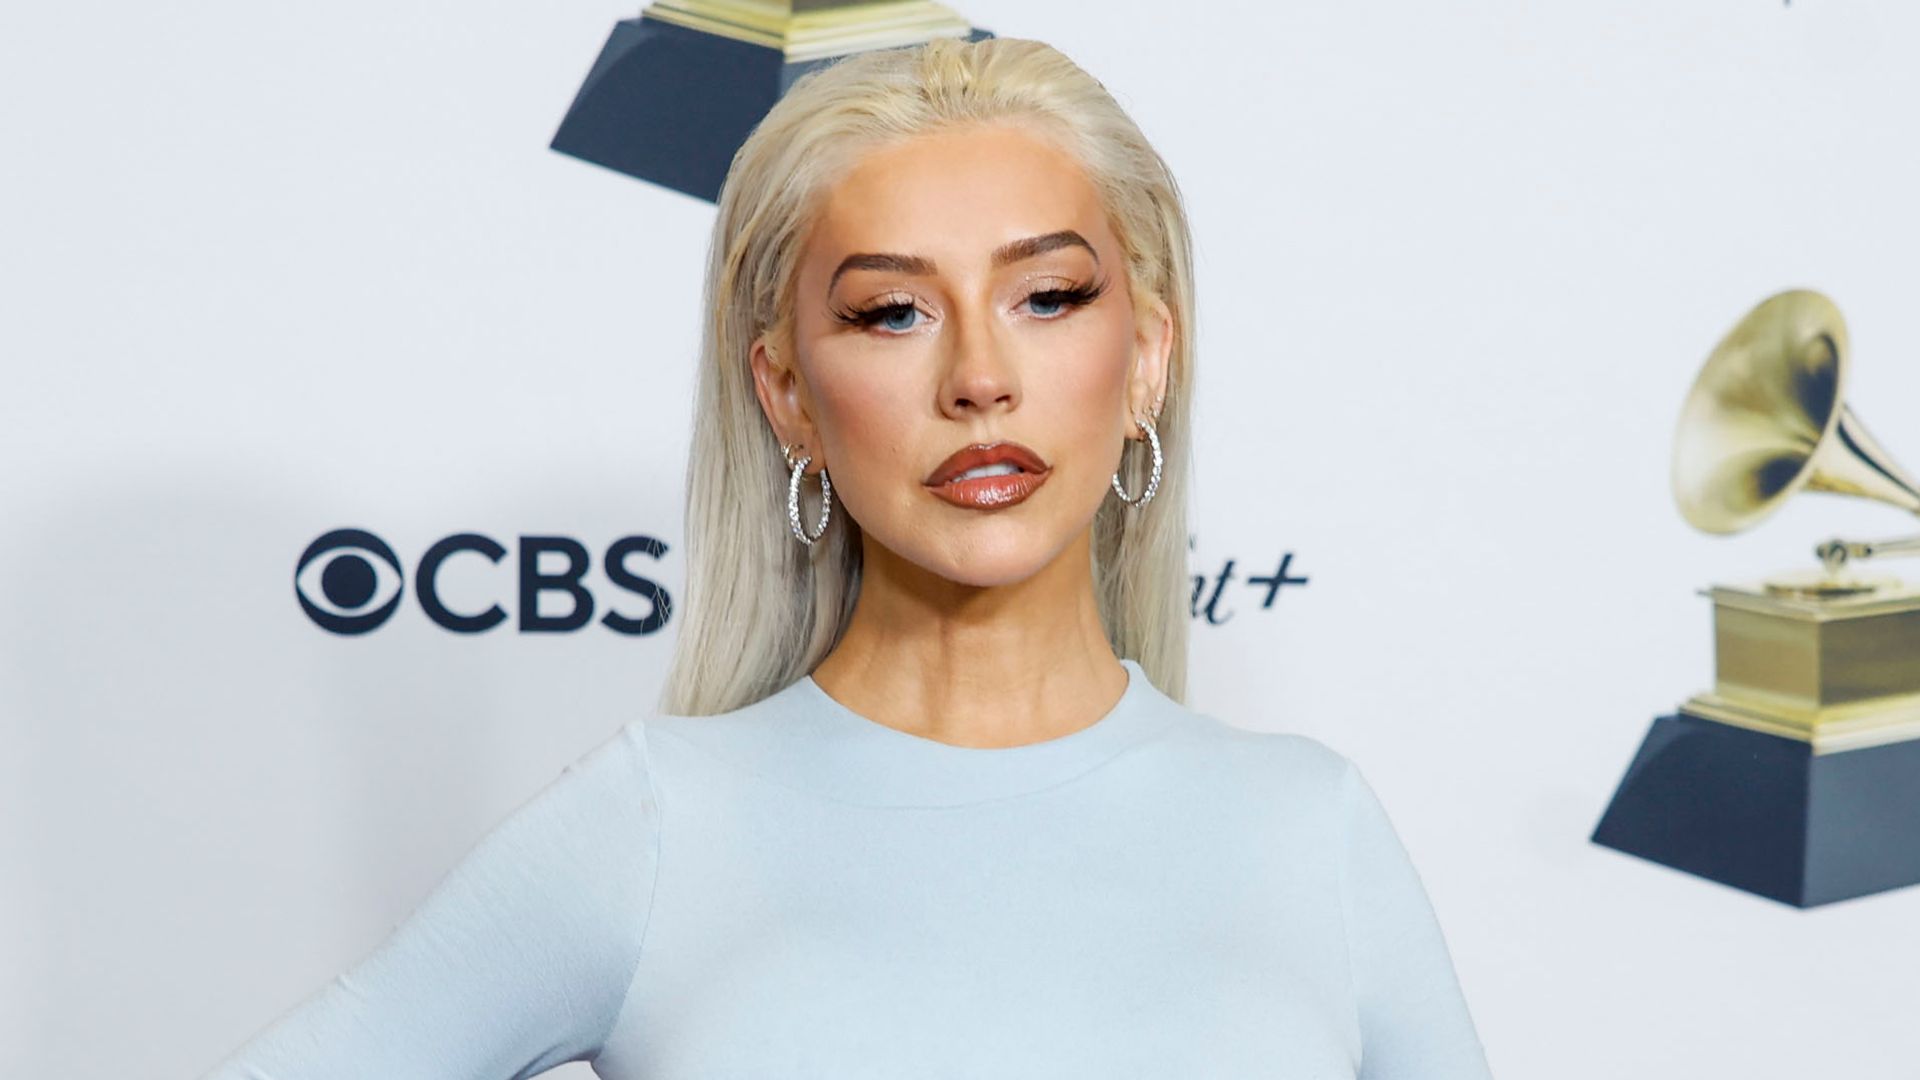 Christina Aguilera shows off svelte new look in tight ice blue dress